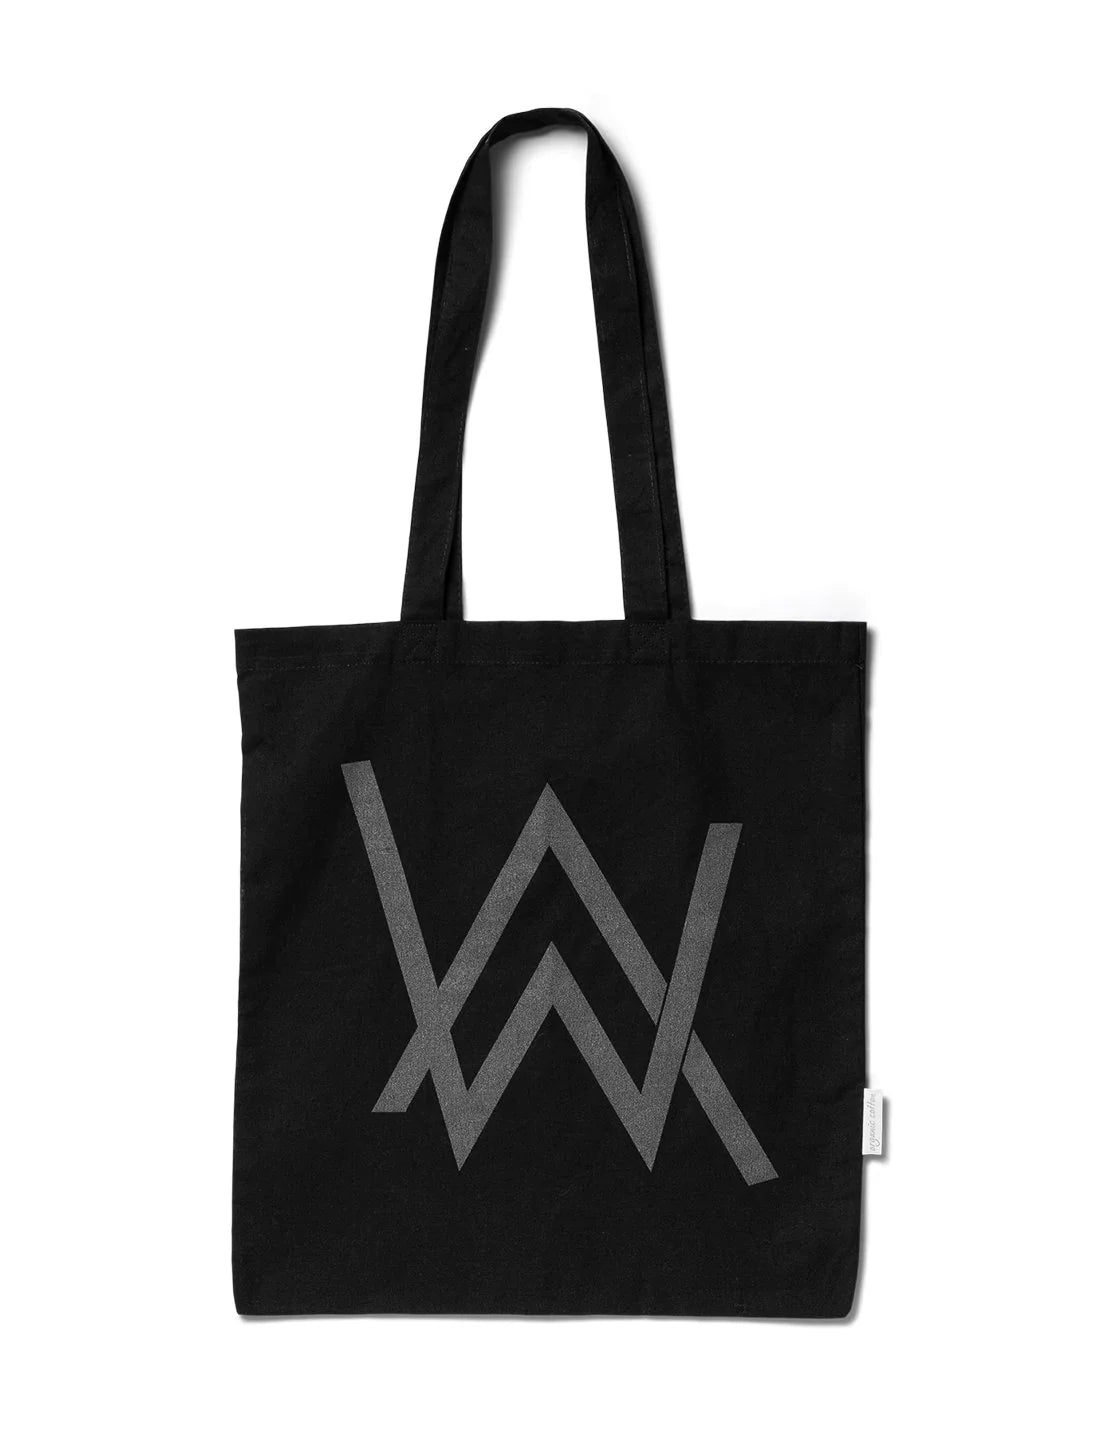 Durable black CORE REFLECTIVE TOTE BAG viewed from the back, displaying a subtle outline of the signature 'AW' logo, epitomizing minimalist design with a functional aesthetic, set against a white backdrop.